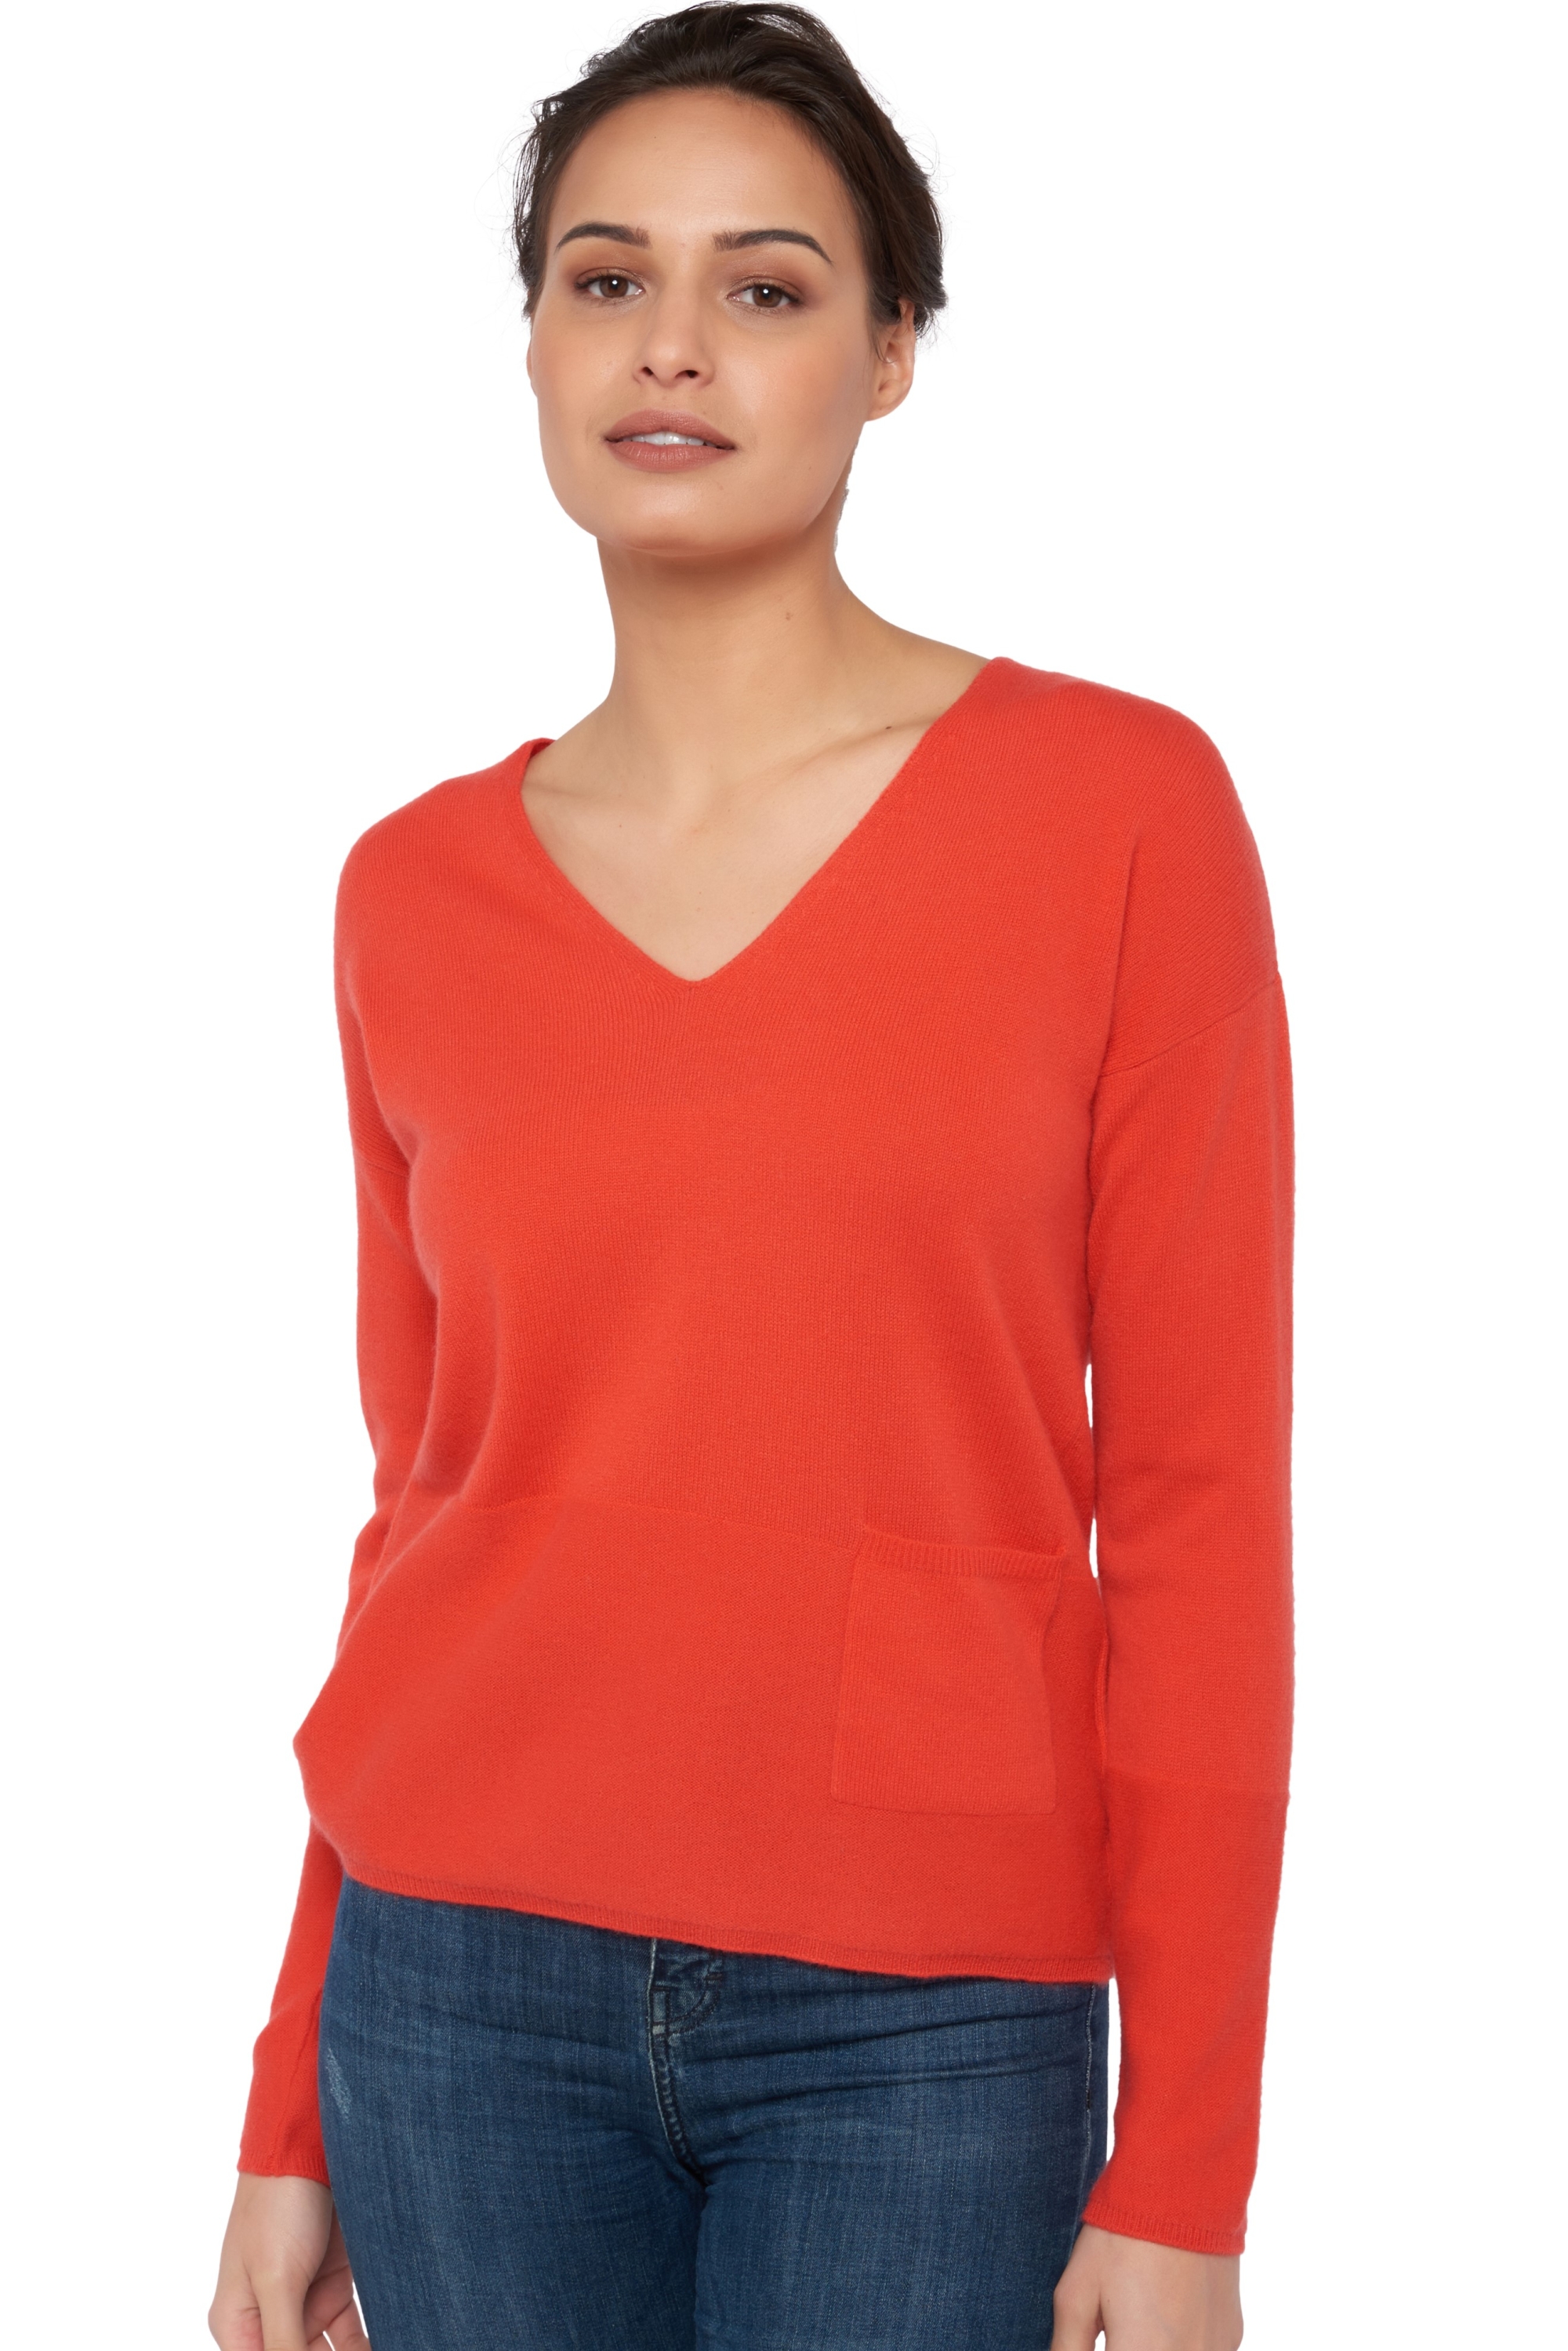 Cachemire pull femme collection printemps ete uliana corail lumineux s